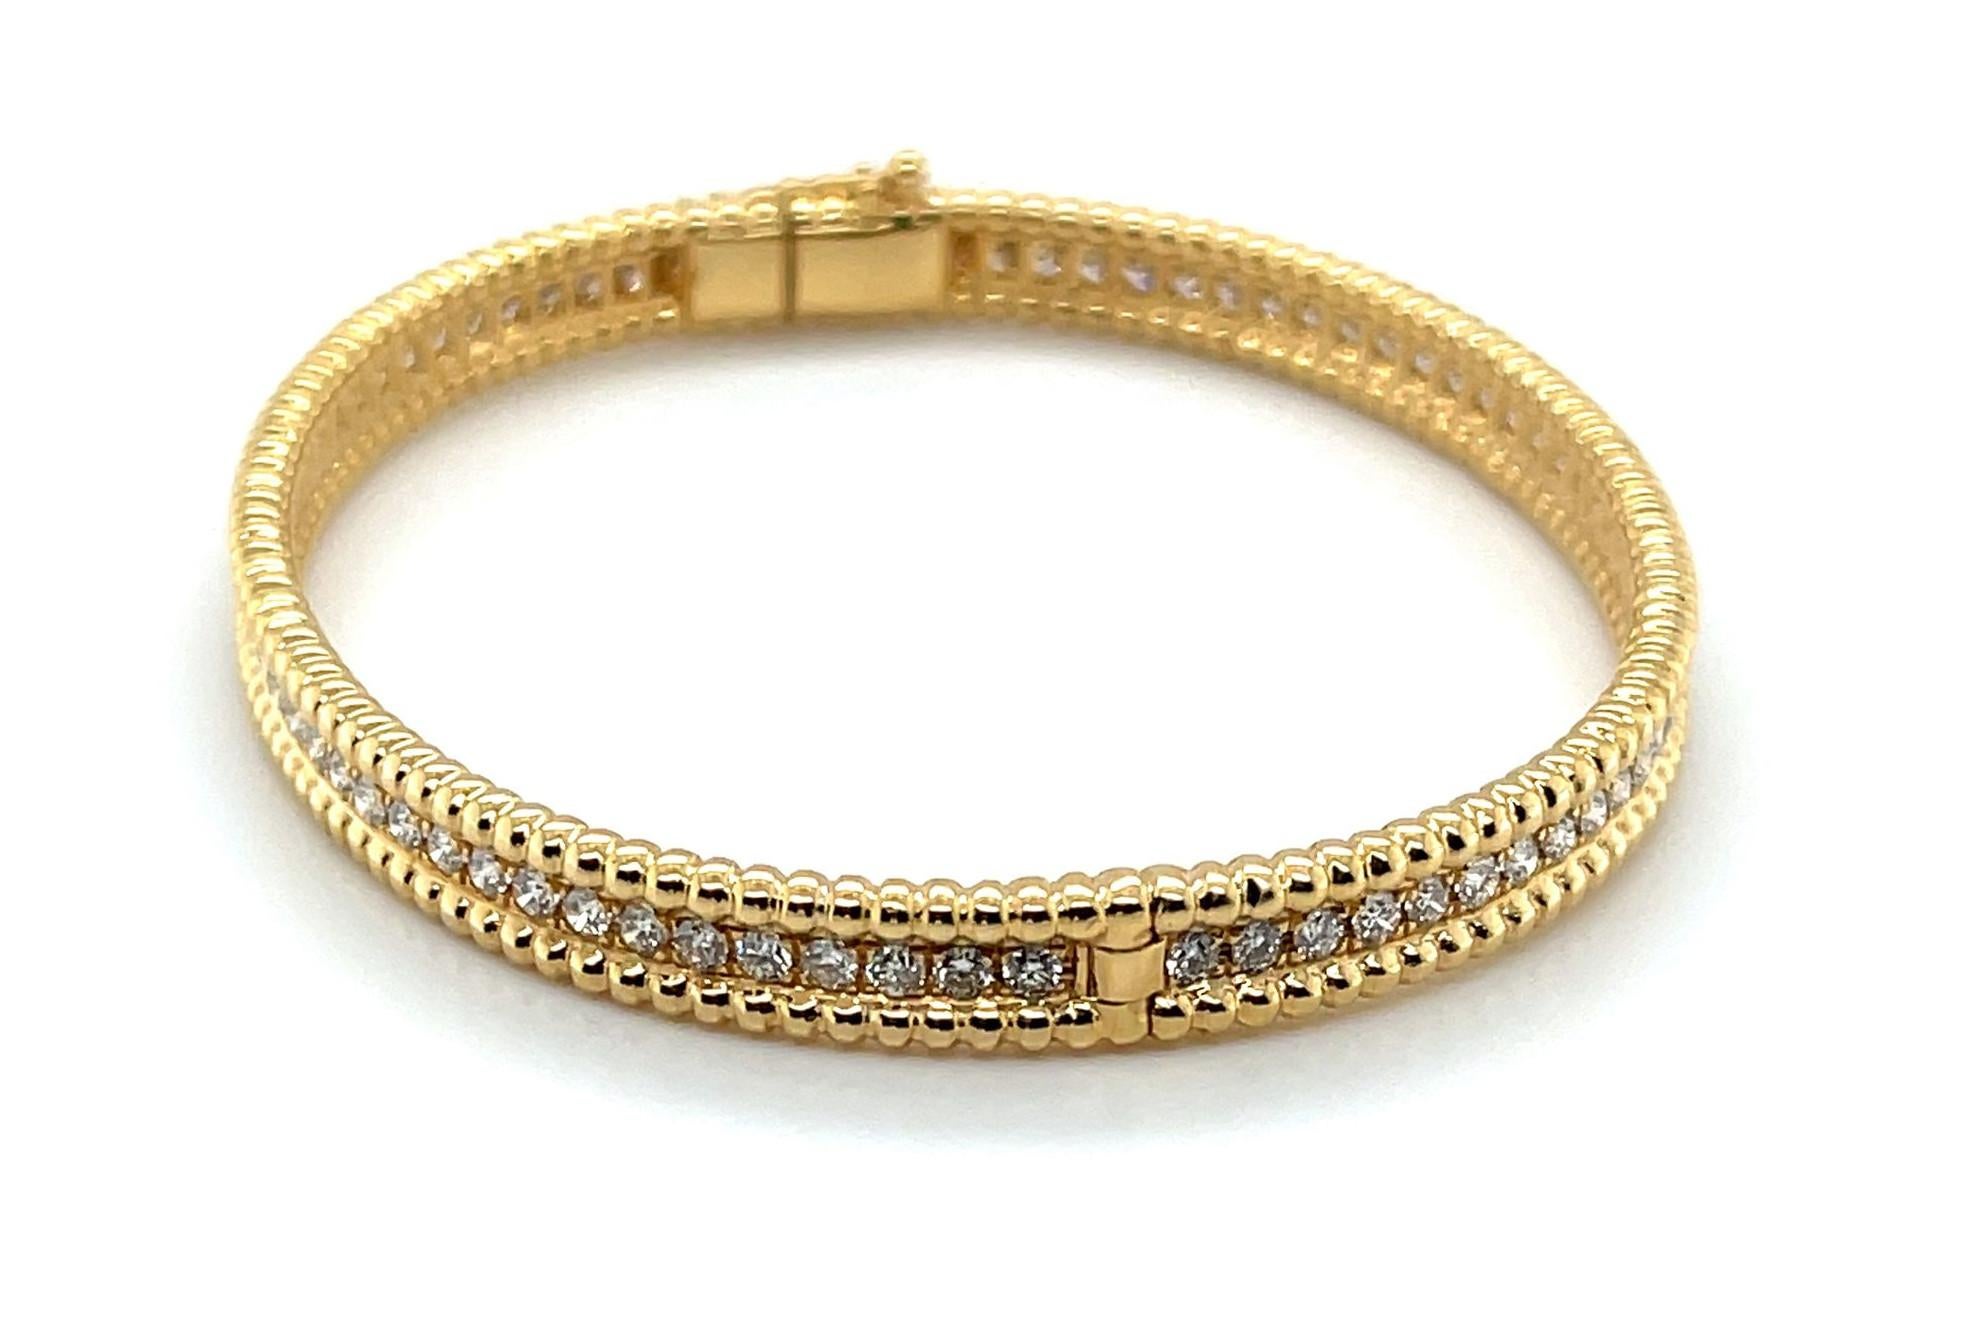 Round Cut Diamond and 18k Yellow Gold Hinged Bangle Bracelet, 1.95 Carats Total For Sale